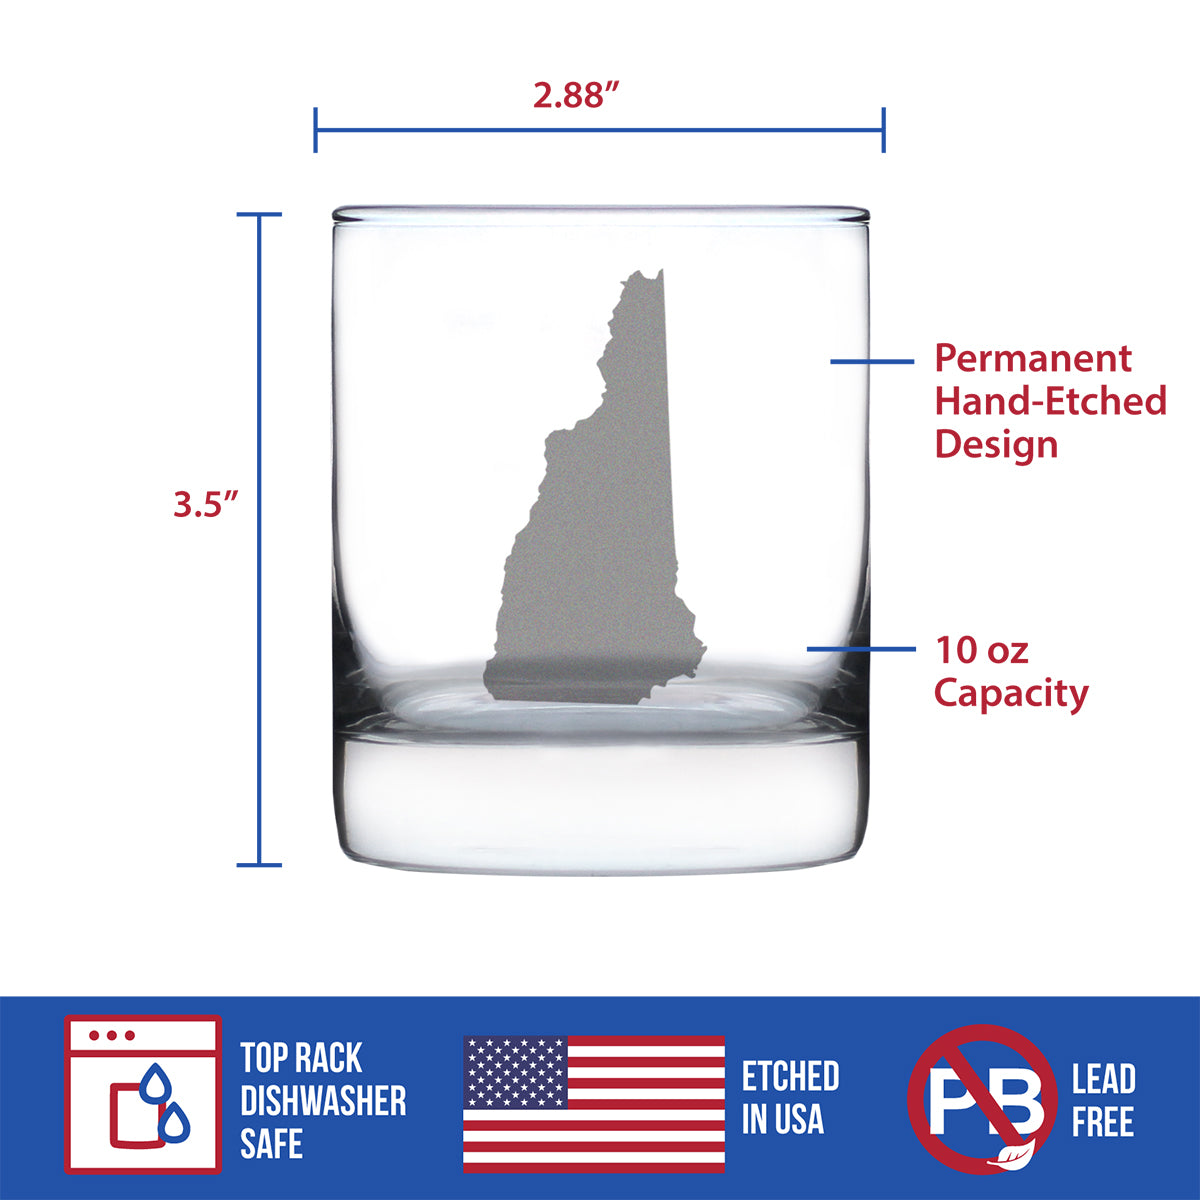 New Hampshire State Outline Whiskey Rocks Glass - State Themed Drinking Decor and Gifts for New Hampshirite Women &amp; Men - 10.25 Oz Whisky Tumbler Glasses